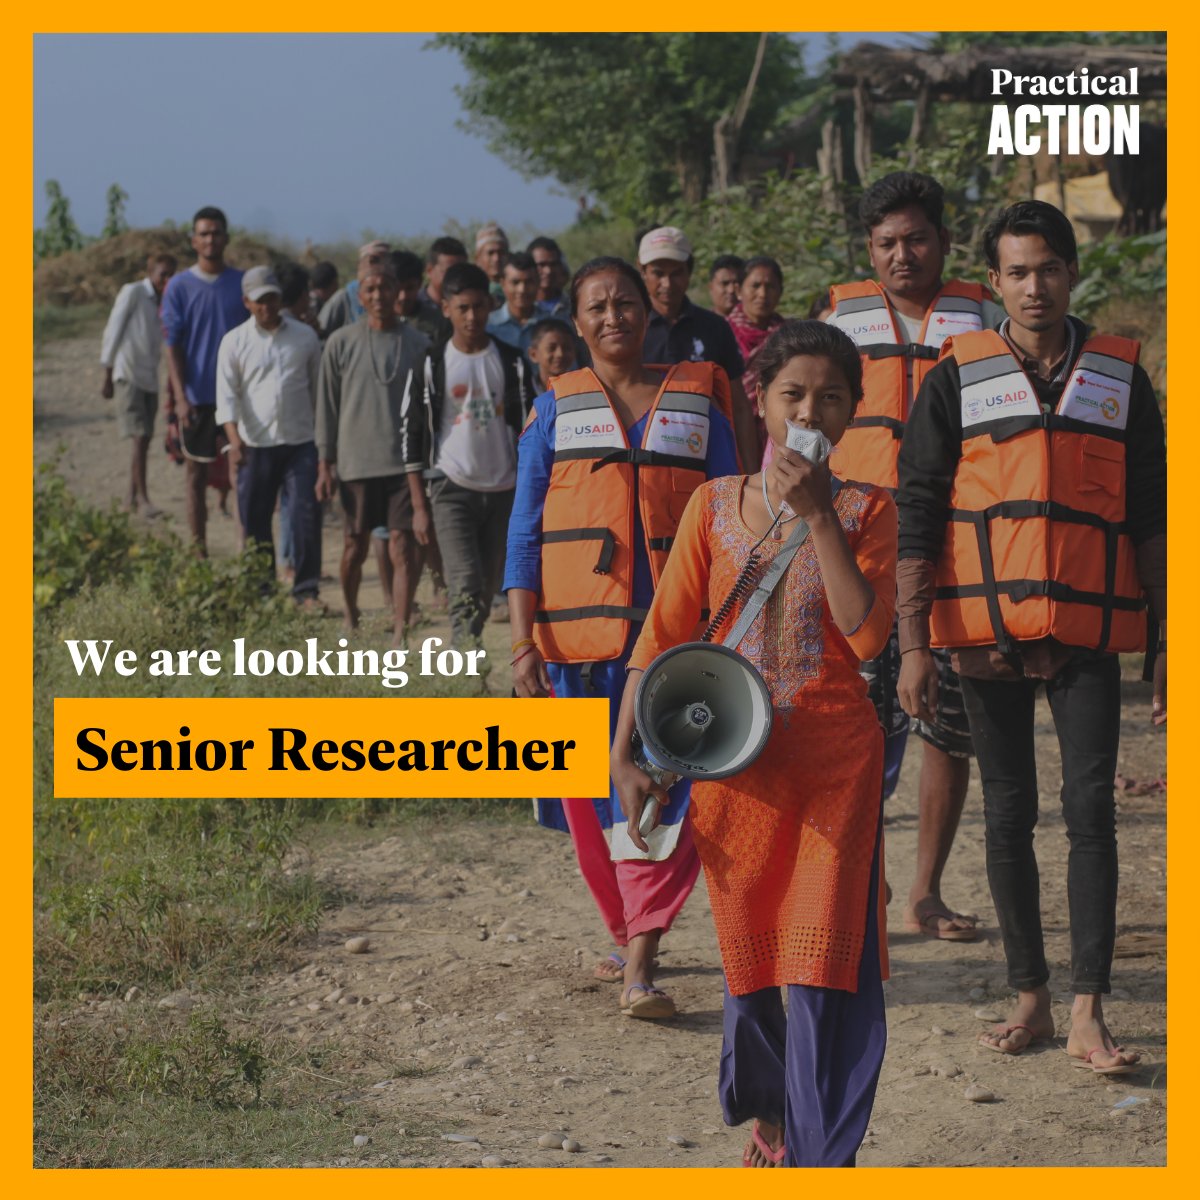 Practical Action is looking for a Senior Researcher.

Here is an opportunity for a PhD holder to join the team if you have the knowledge and experience in the field of climate change adaptation.

#opportunity #climatechangeadaptation

For more information: lnkd.in/dXxkKvrZ